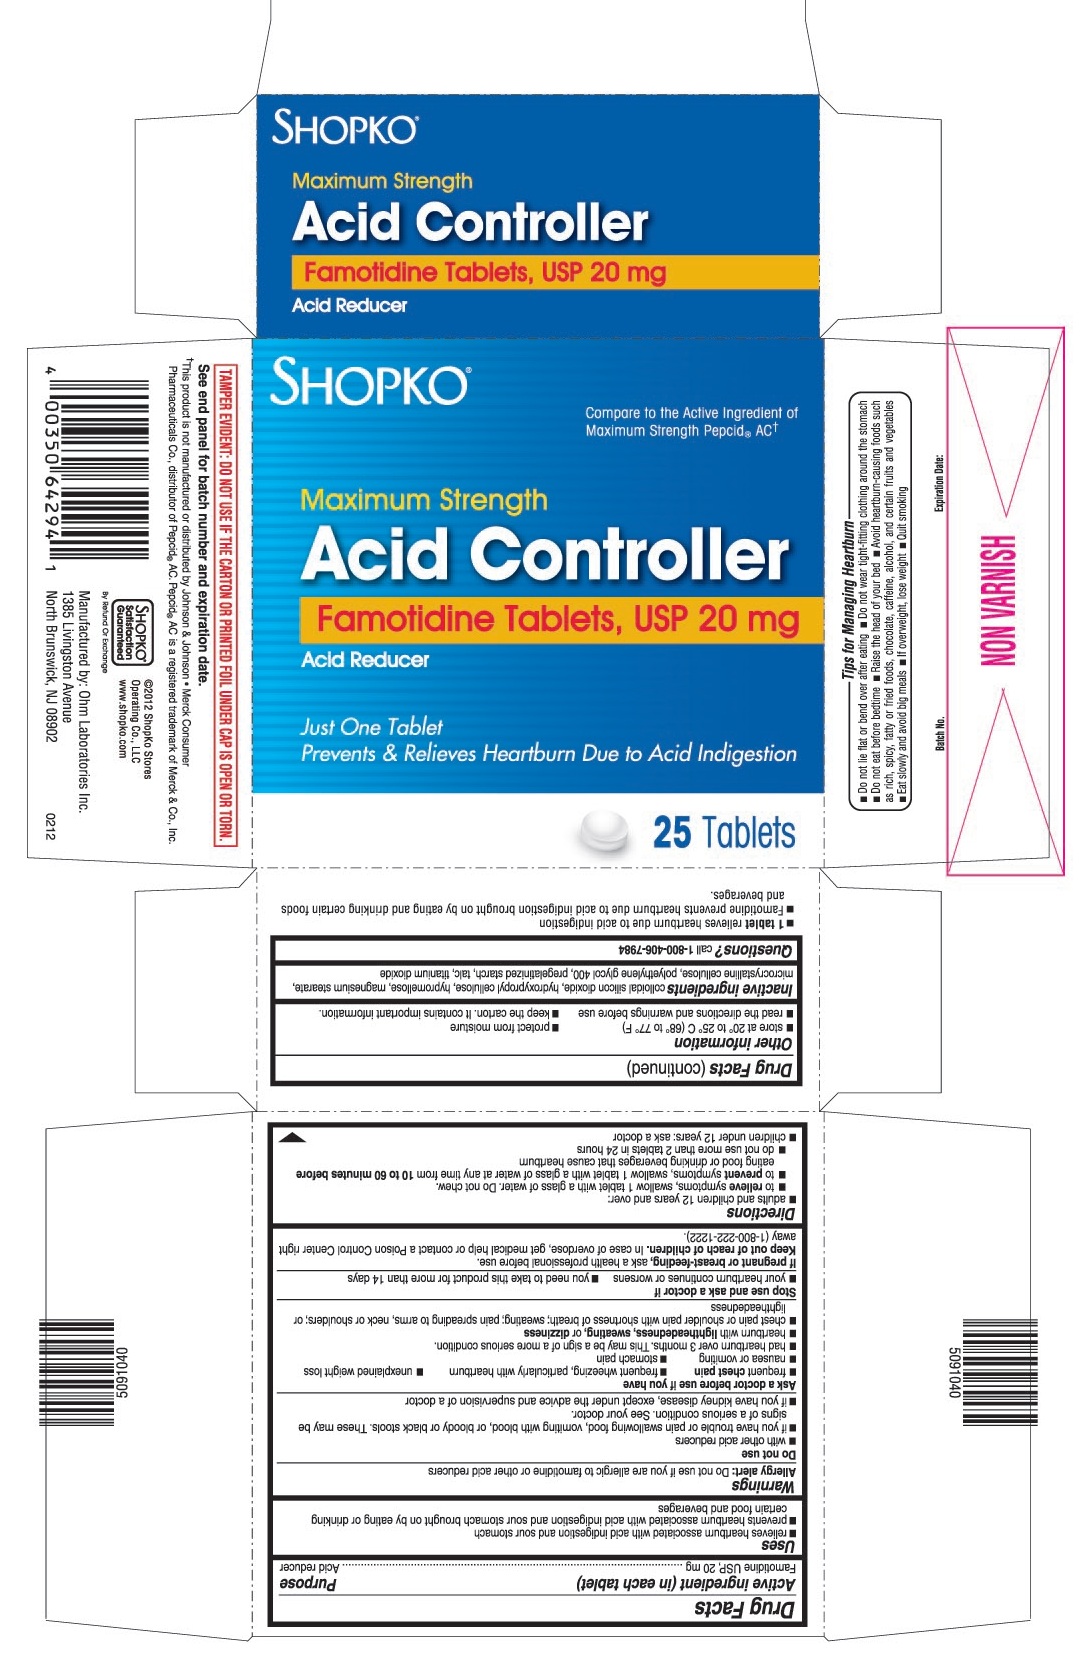 This is the 25 count bottle carton label for Shopko Famotidine tablets, USP 20 mg.